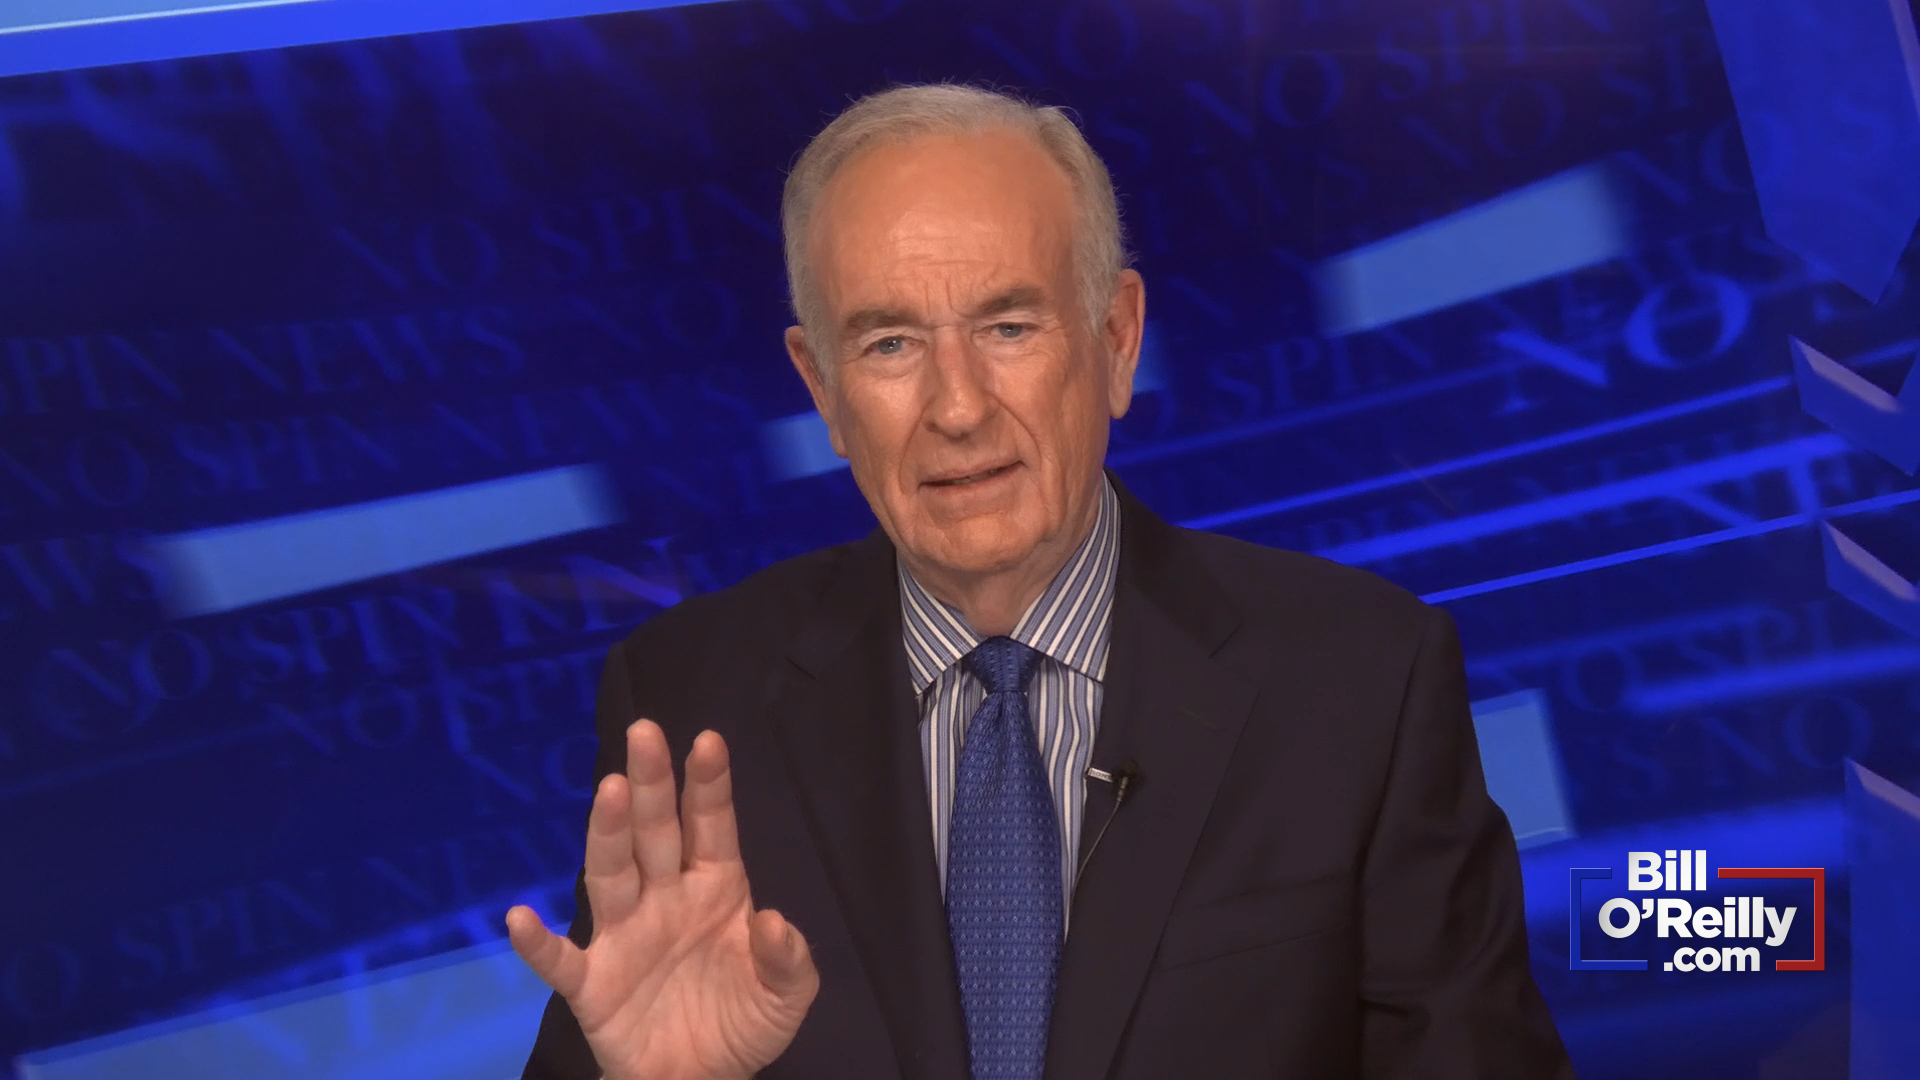 O'Reilly on the Beau Biden Controversy